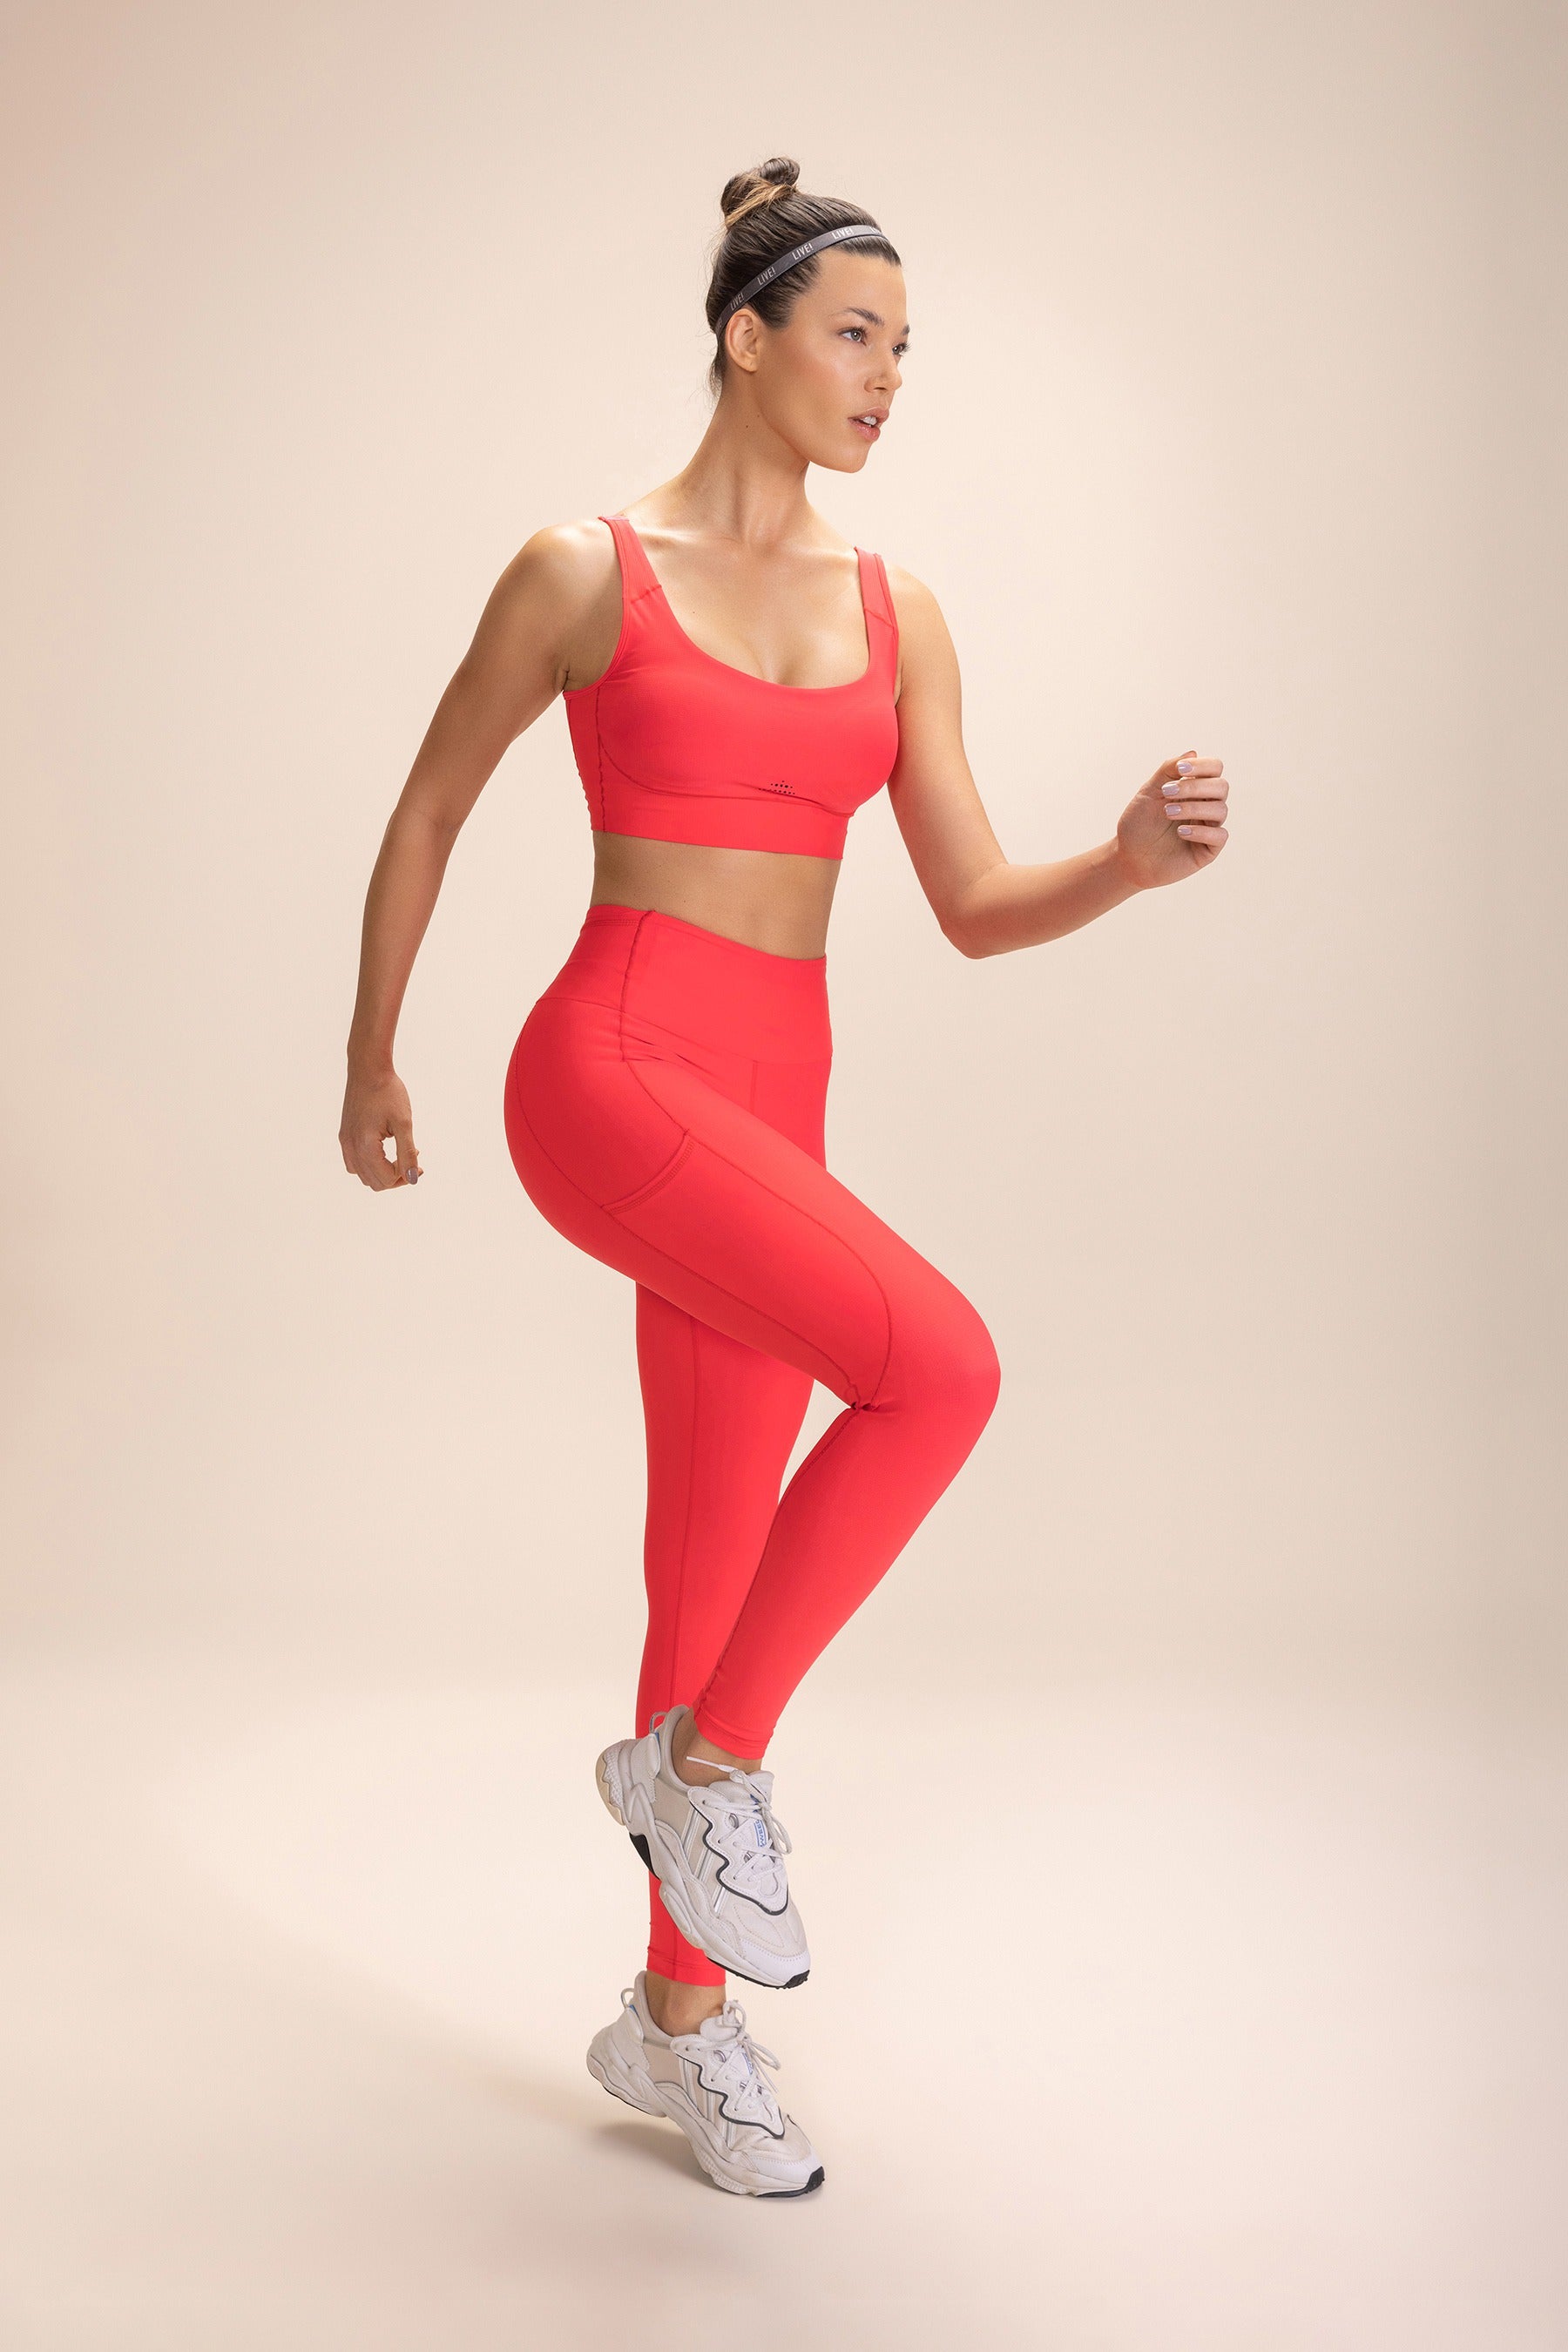 Woman wearing red "Legging 6 Pockets Speed" and matching sports bra, demonstrating a running pose against a beige background.